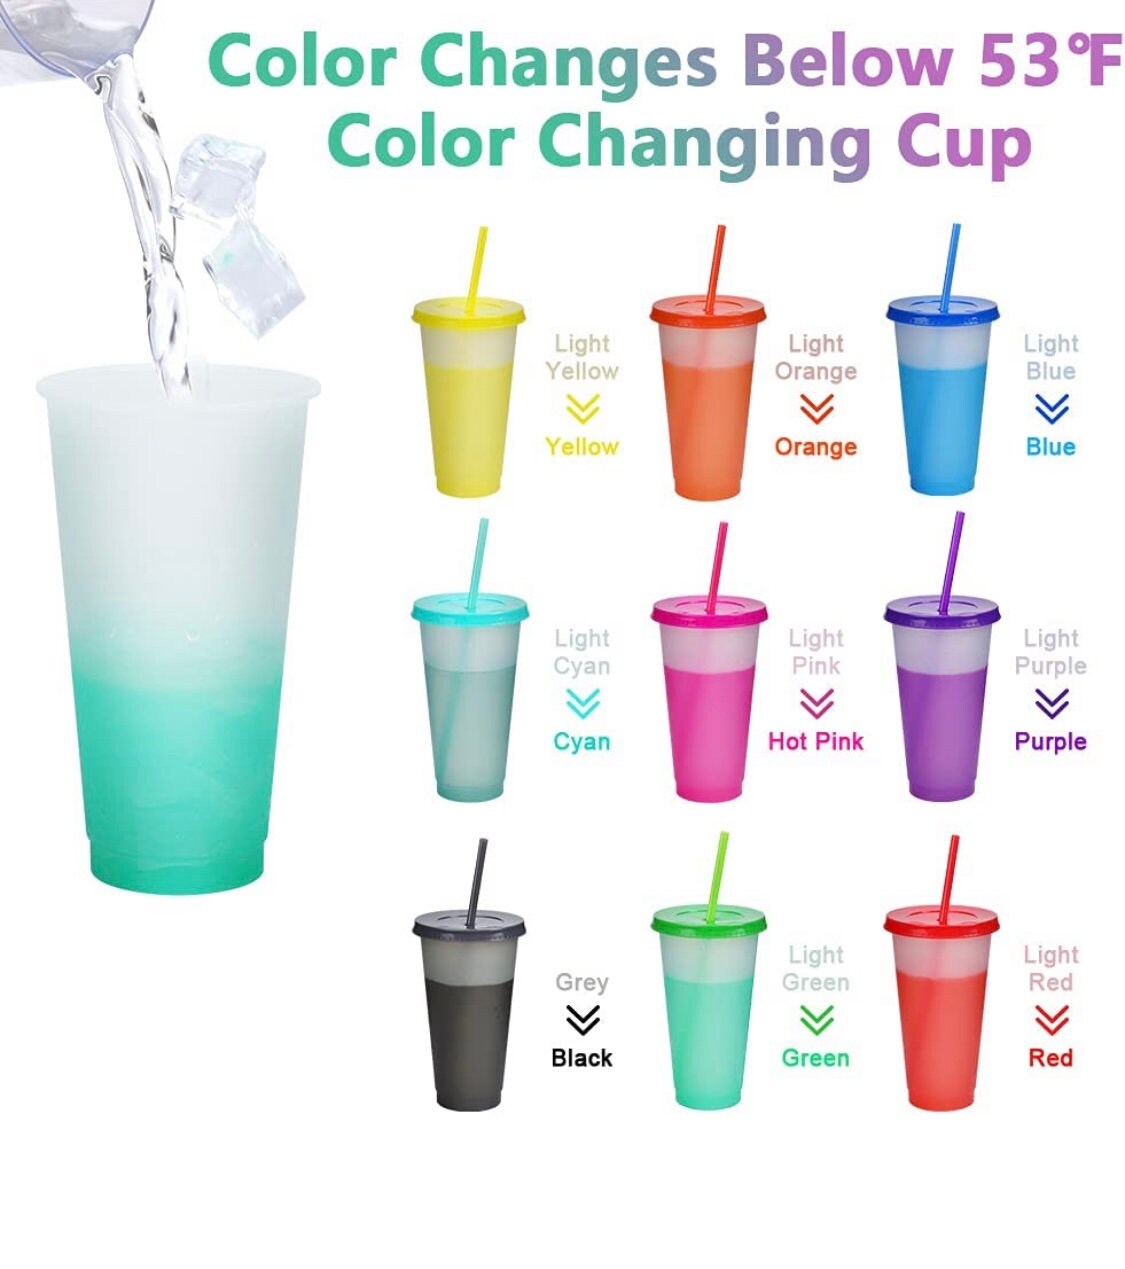 Color Changing Disney Tumblers Give Drinks a Magical Flair - Inside the  Magic